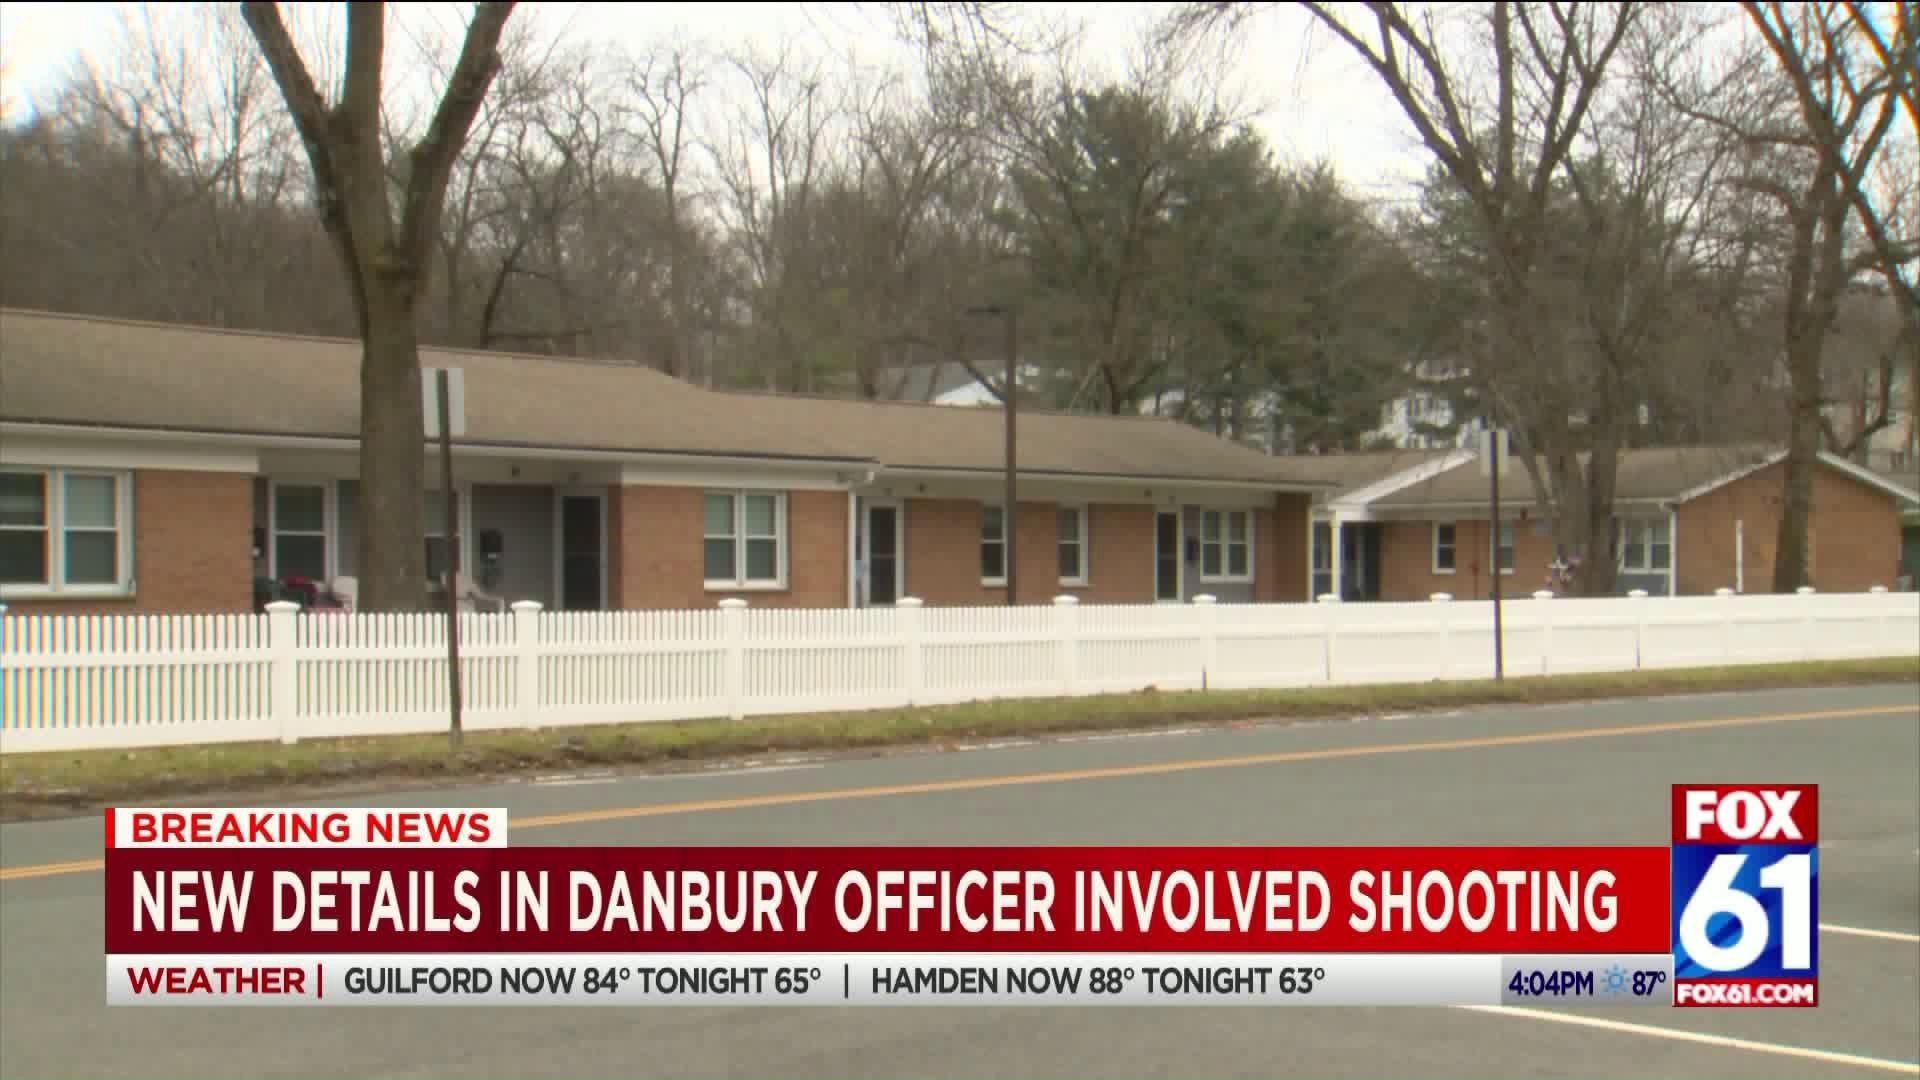 Man arrested in connection with Danbury officer involved shooting